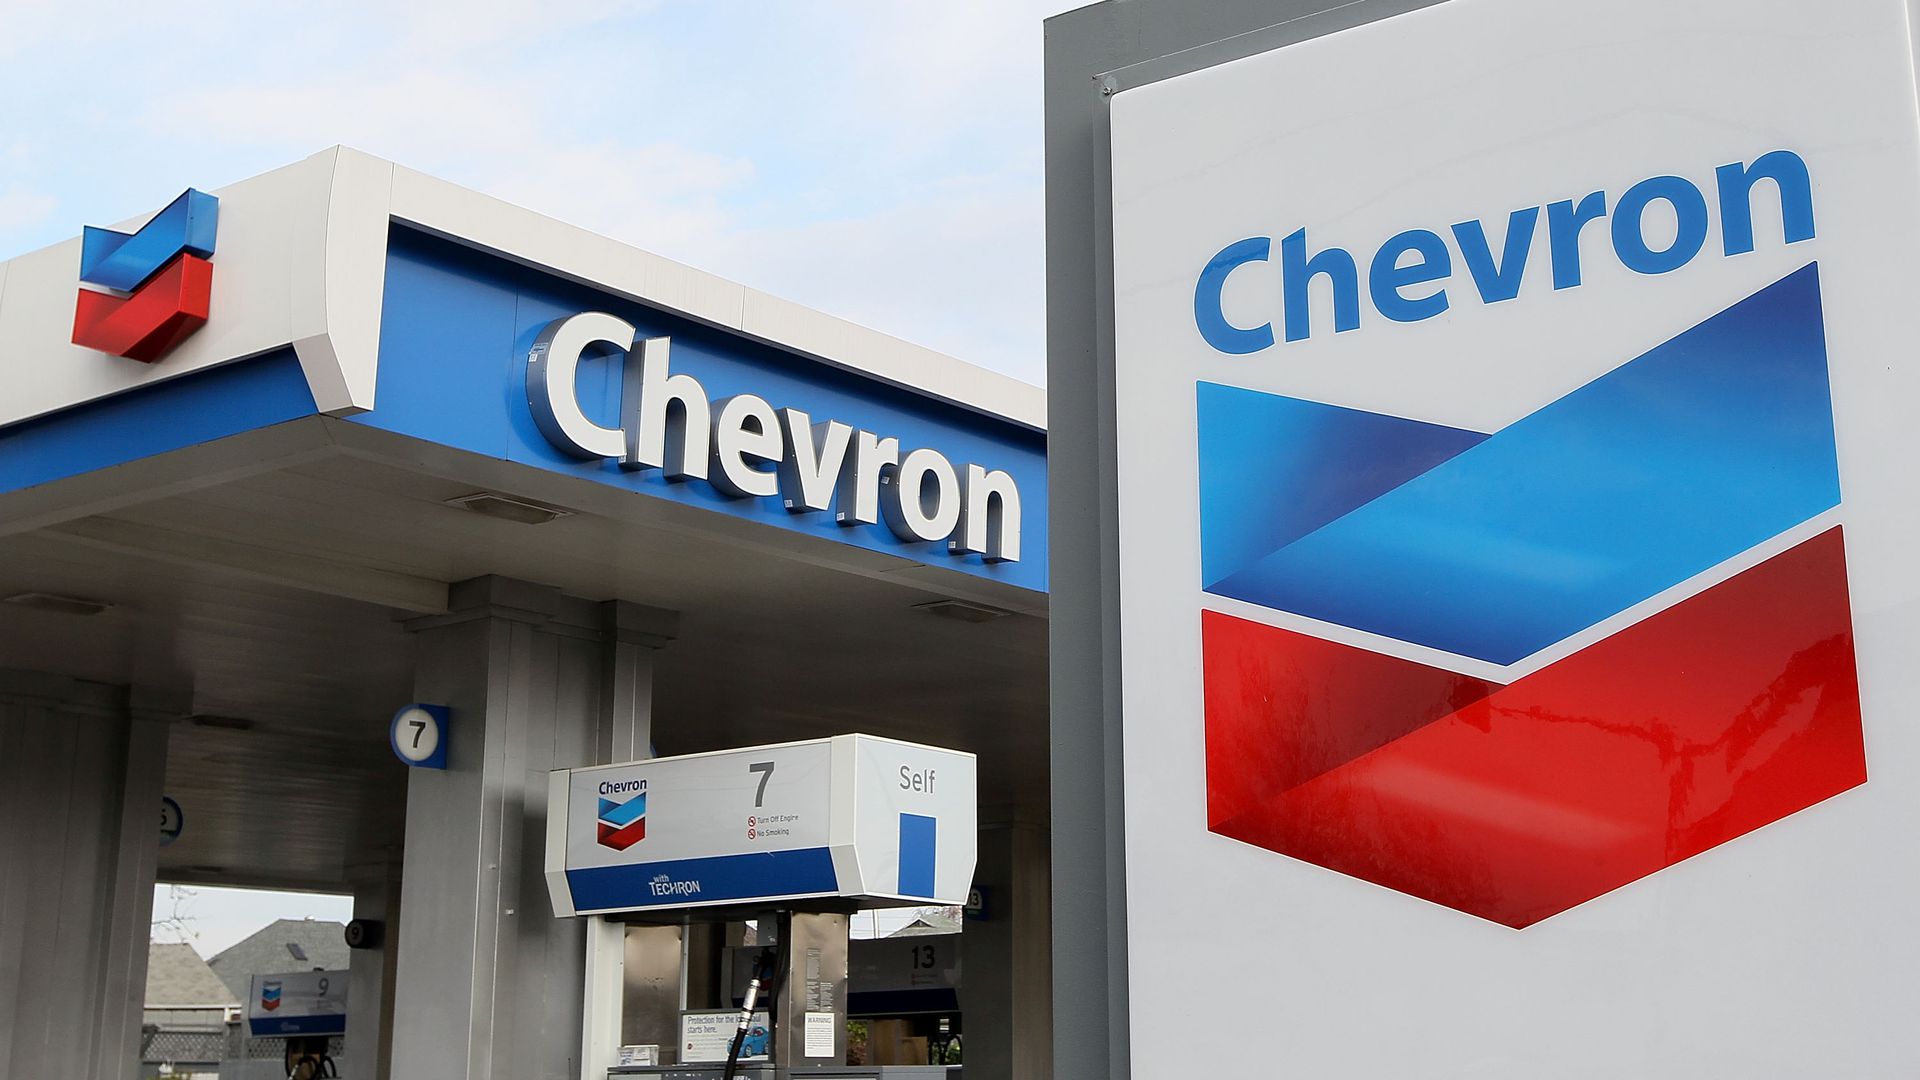 For The Development of Crude Oil Port, Companies Are Dealing with Chevron